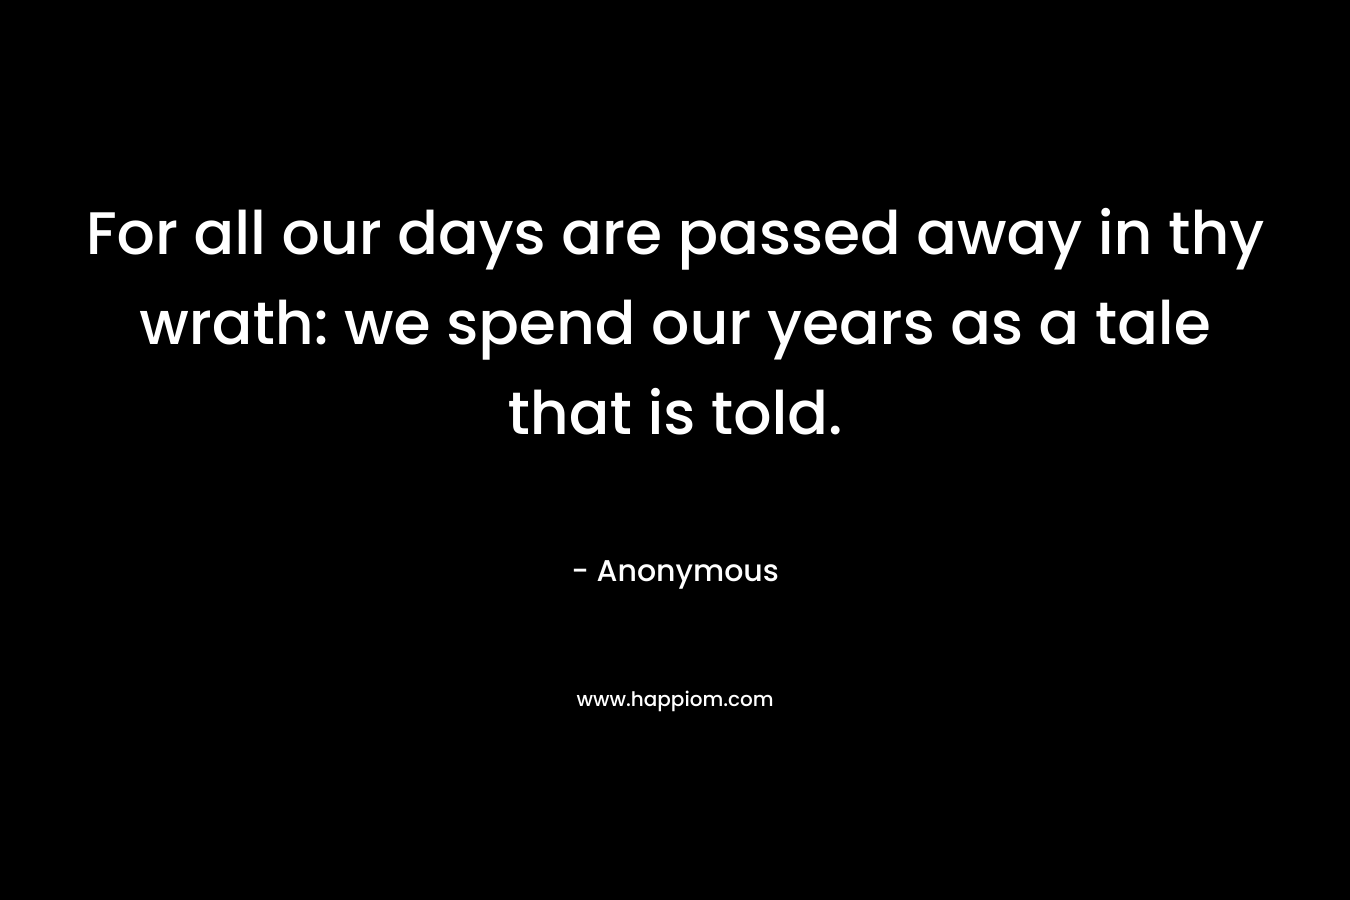 For all our days are passed away in thy wrath: we spend our years as a tale that is told.